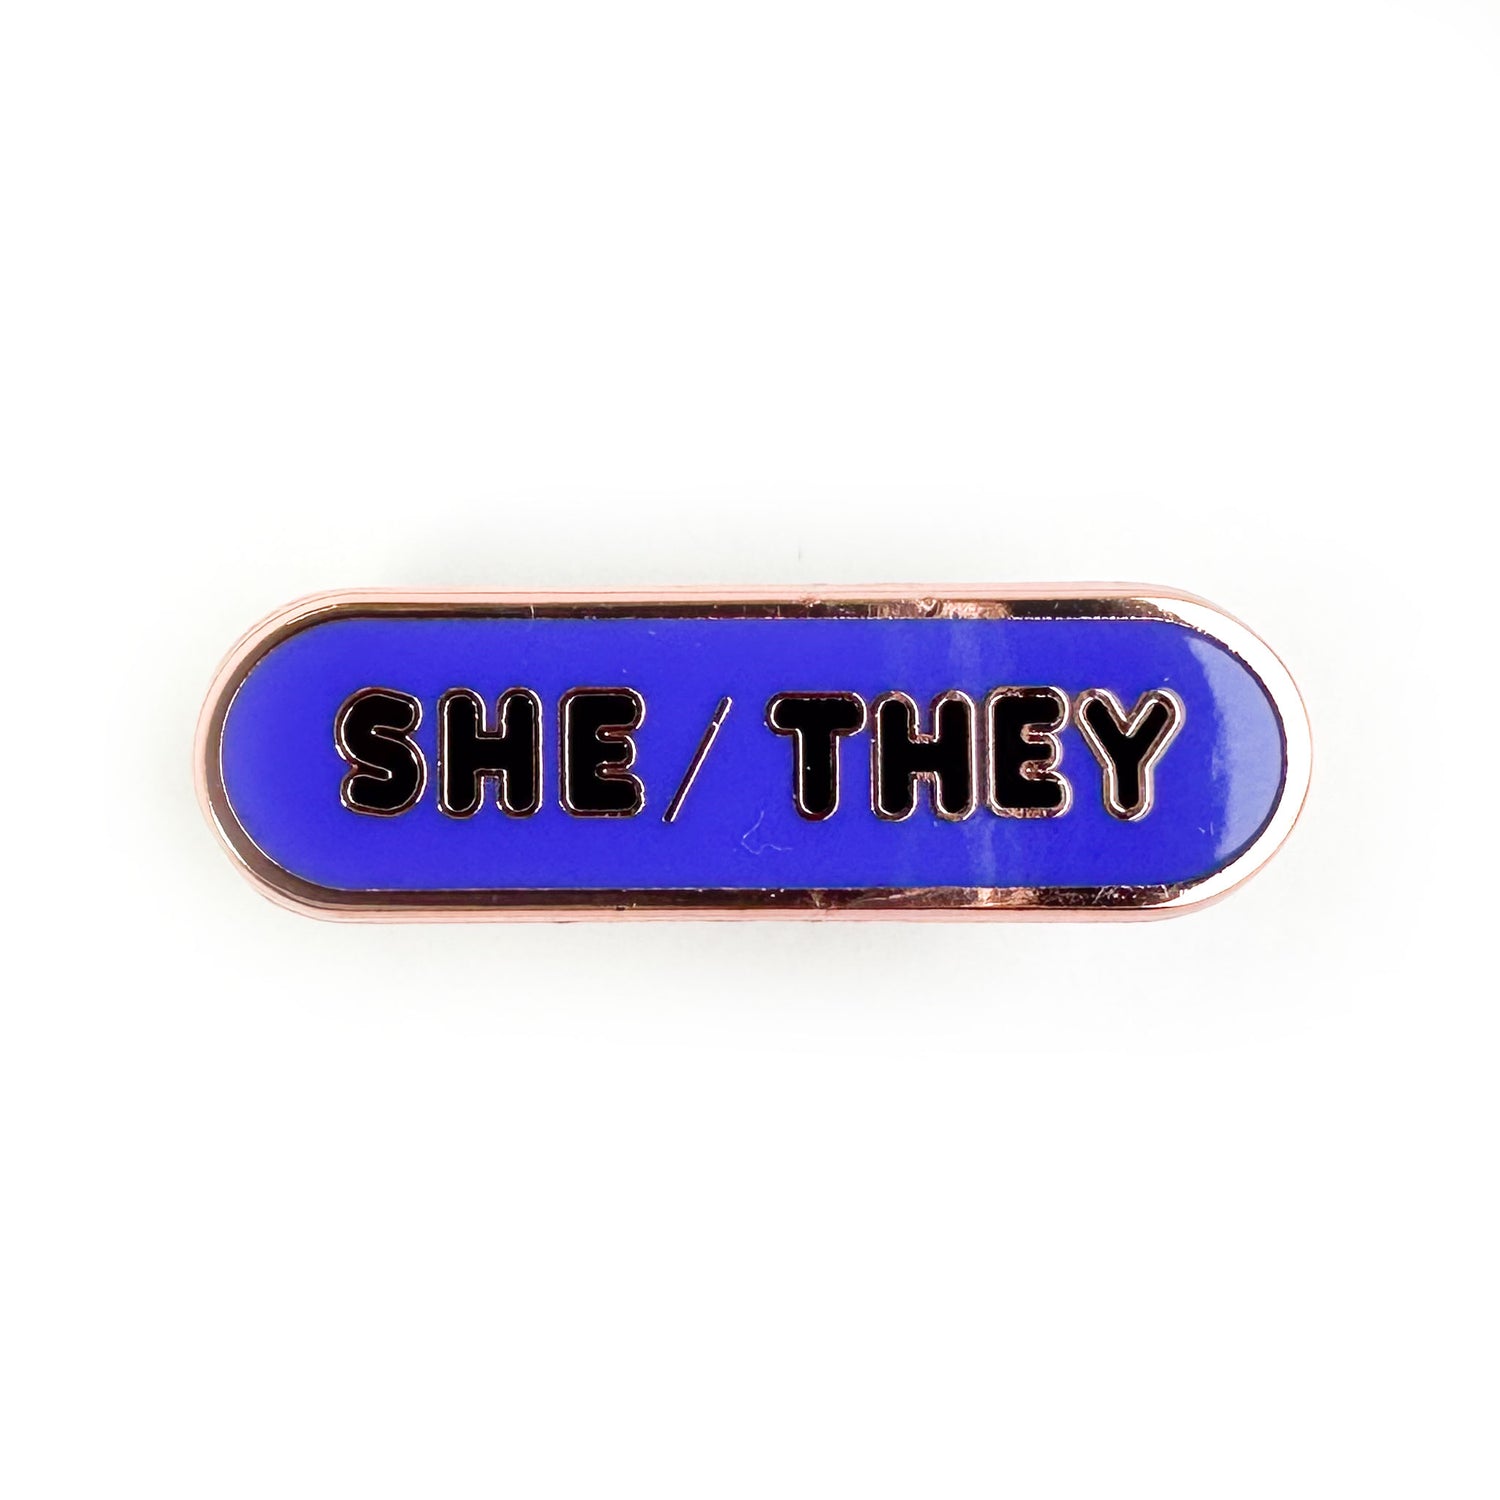 An indigo oval shaped pin with bubble letters on it that spell "She/They" on it. 